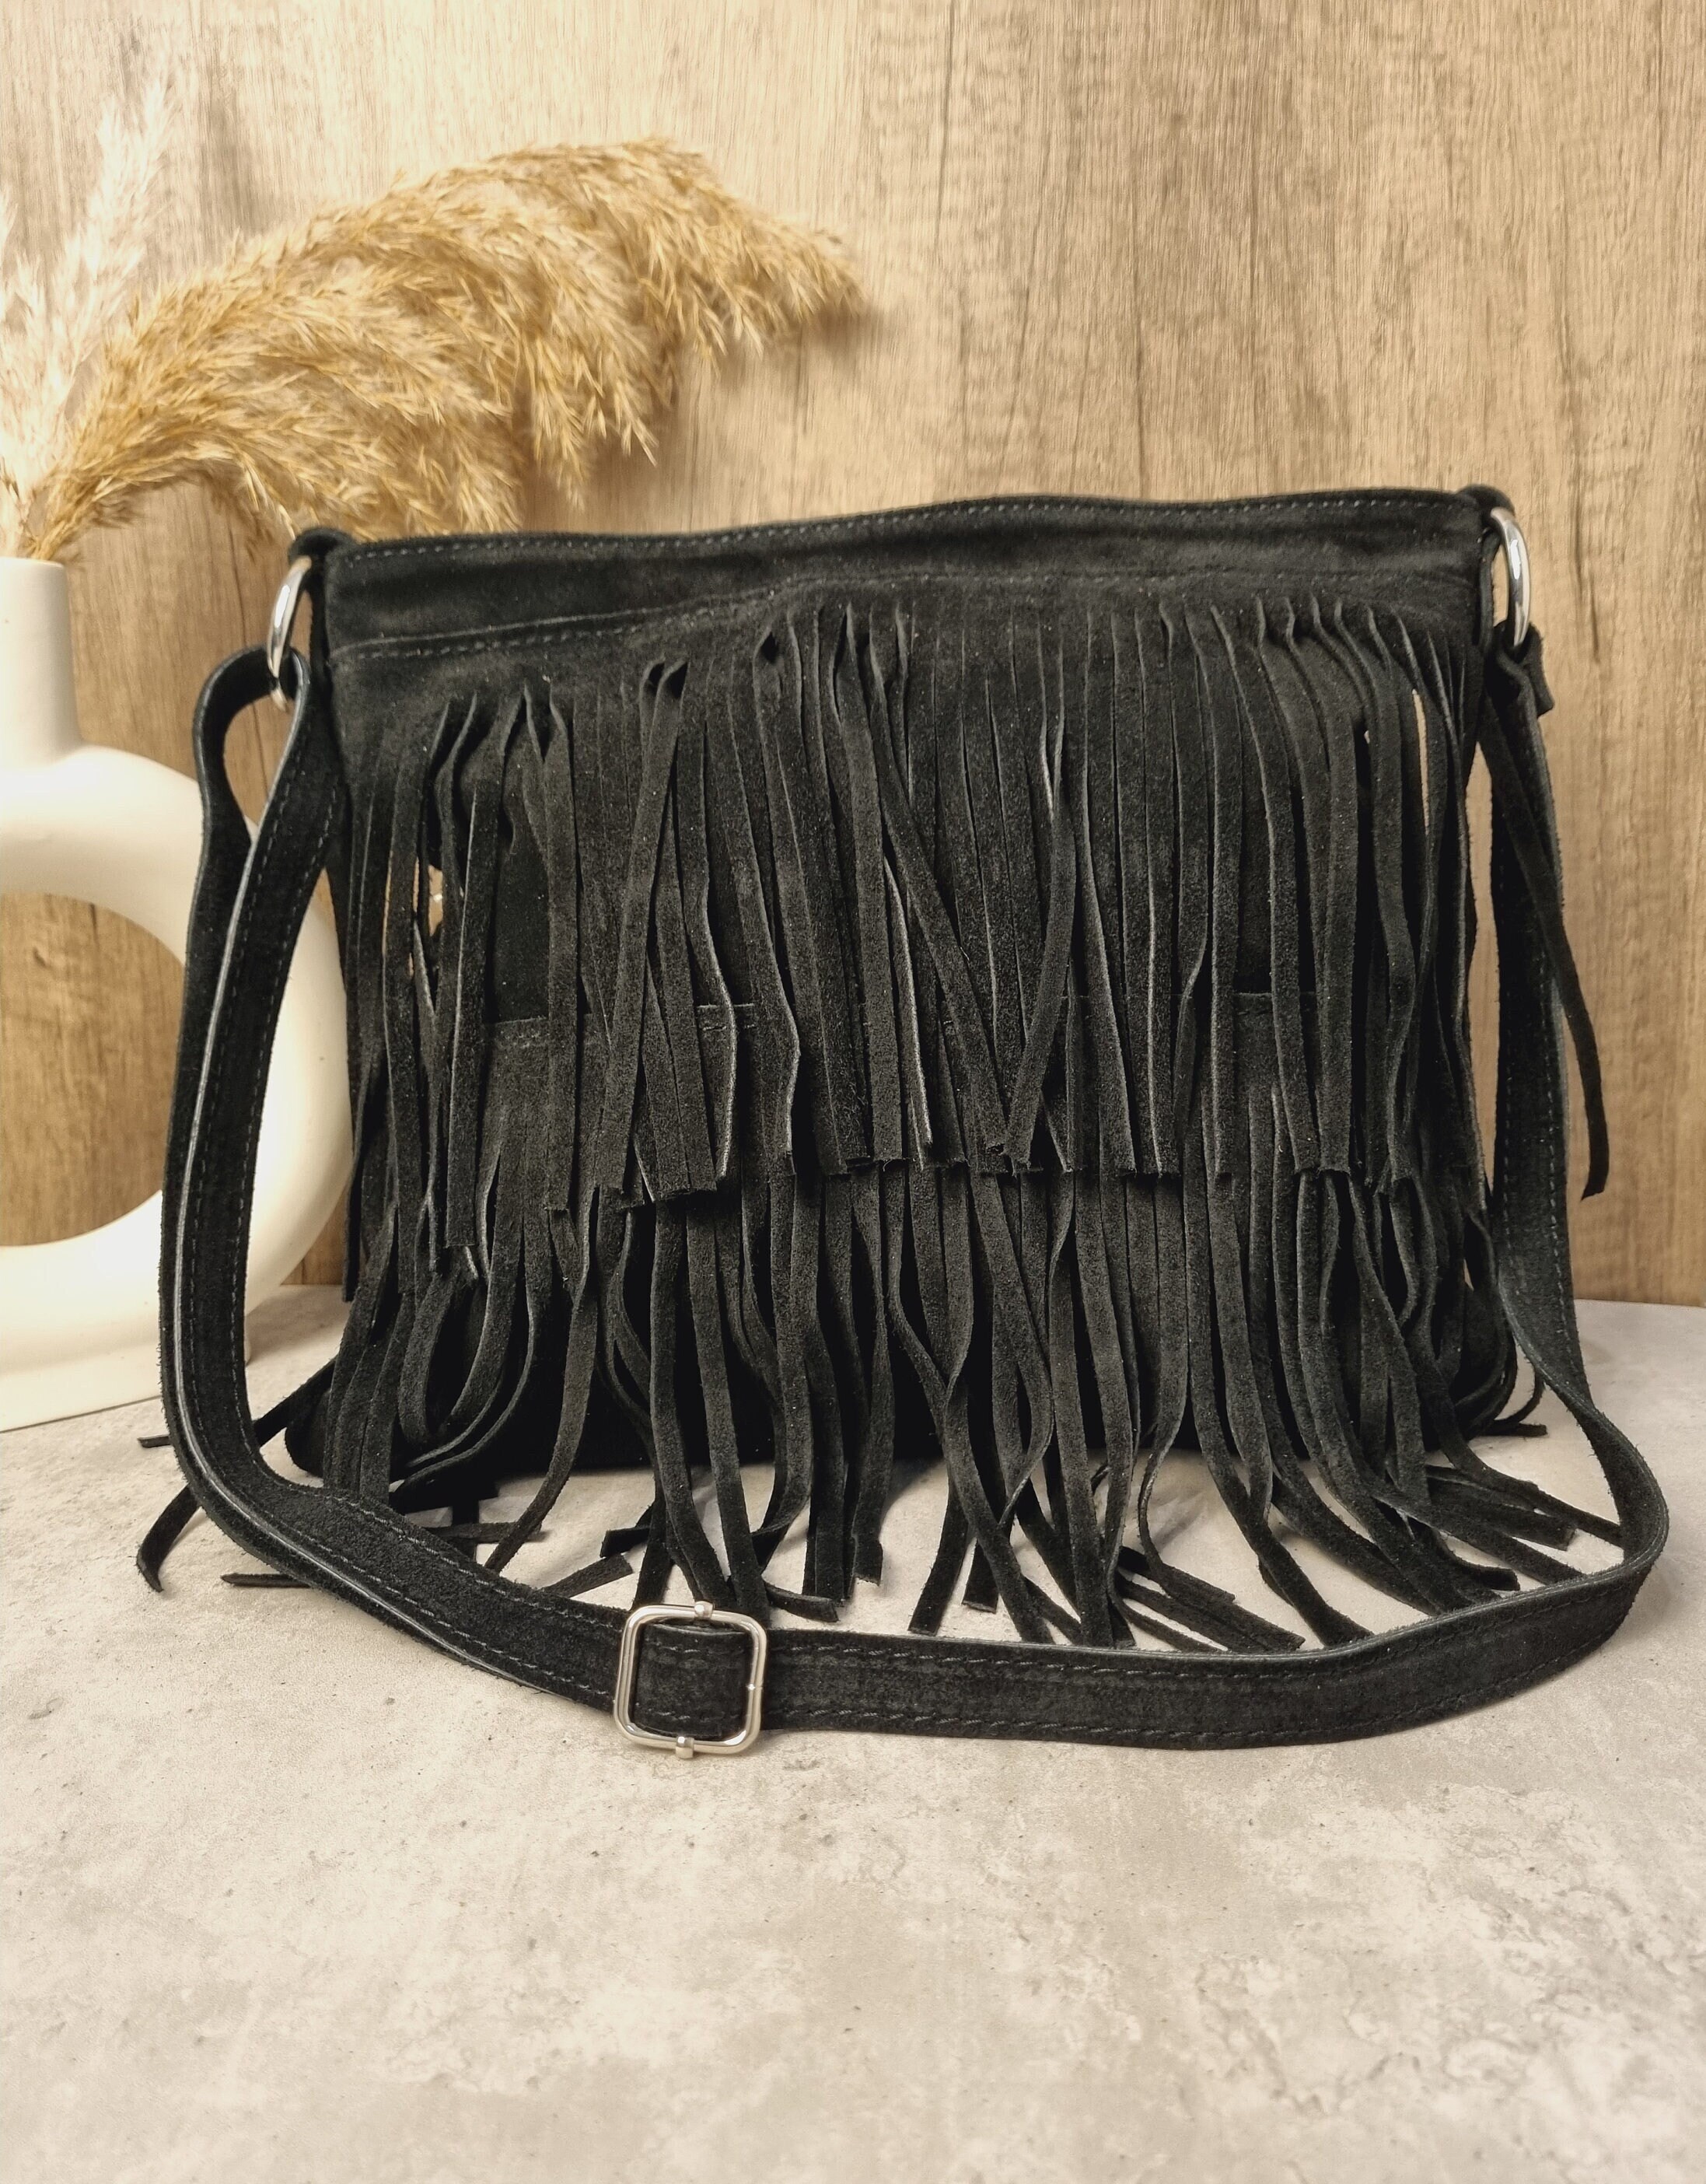 Black Leather Tote Bag with Tassels |